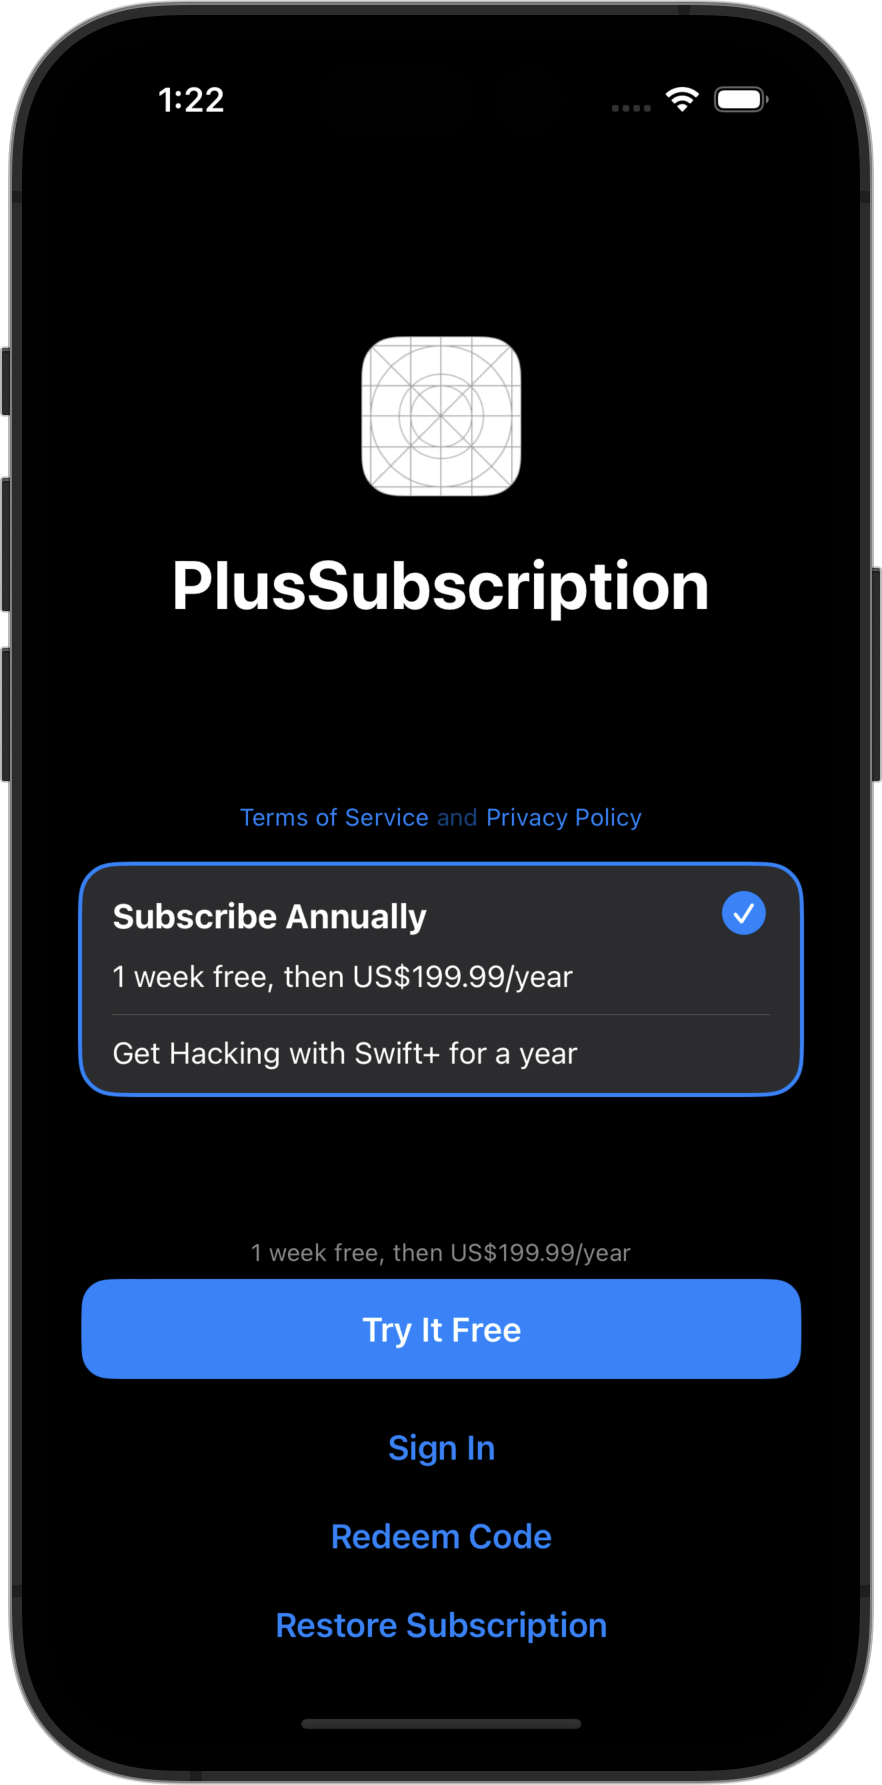 A more complex subscription view with more options to choose from.